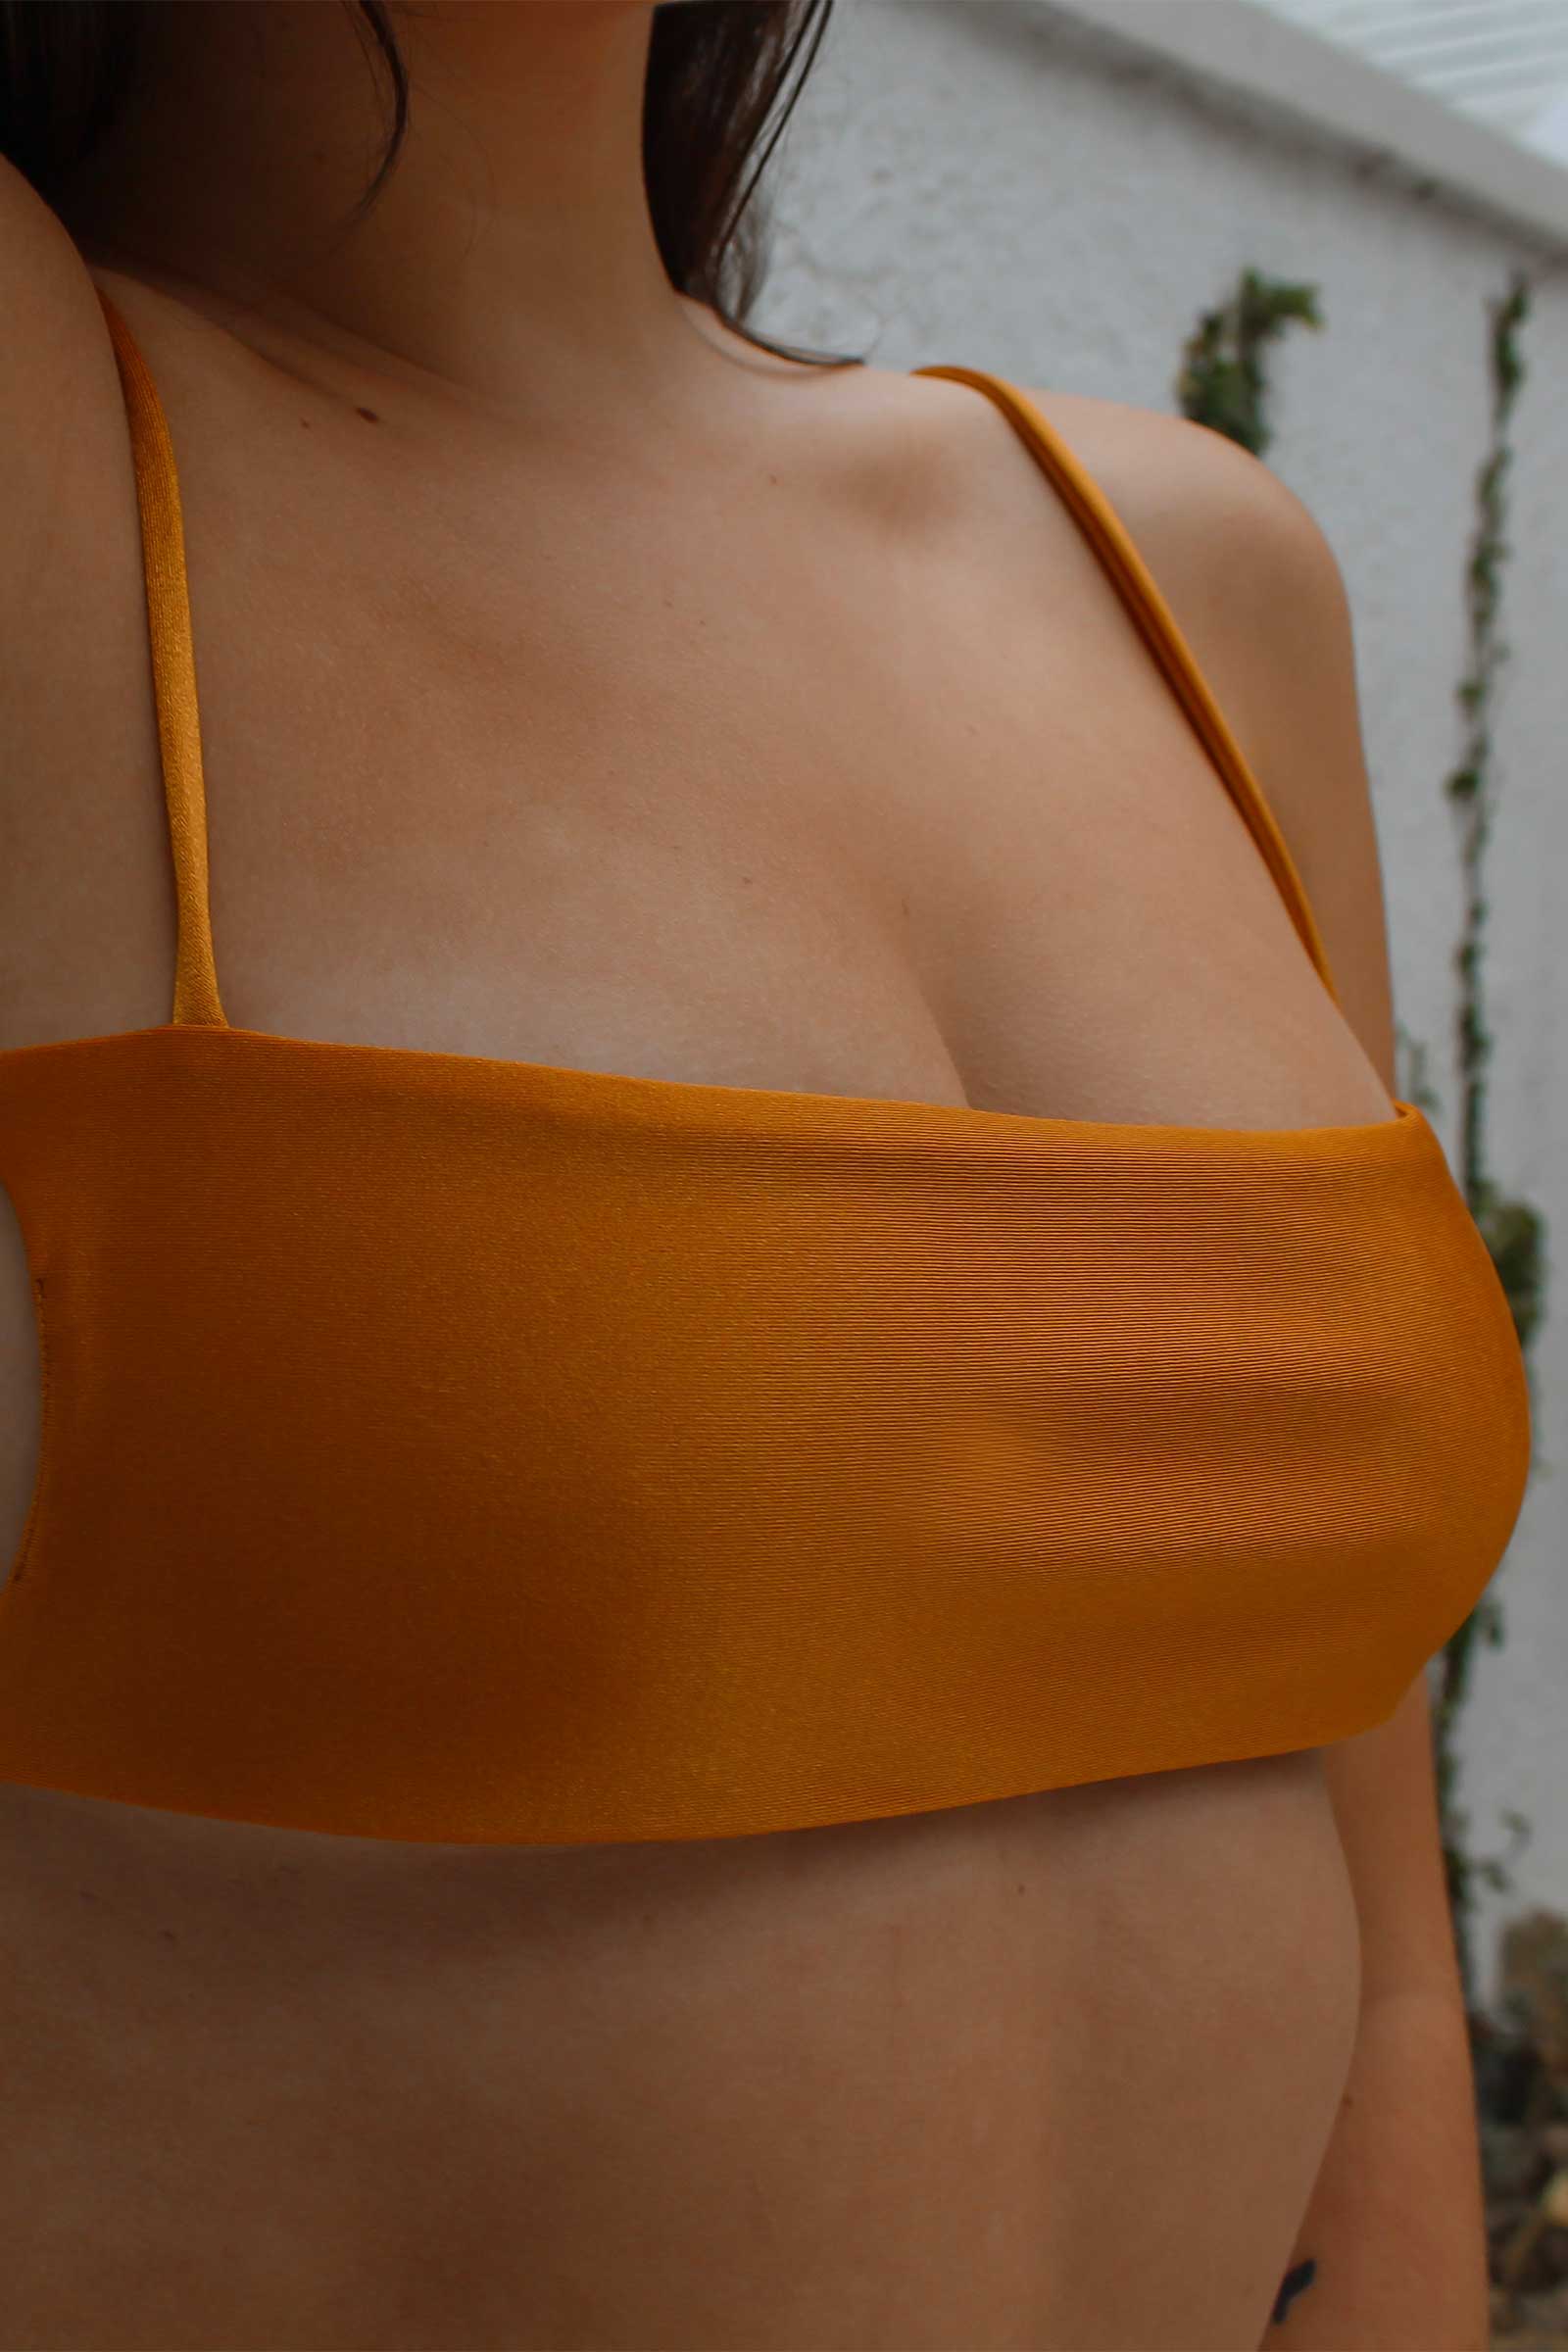 A-dam Bikini top with rocket ice creams from recycled plastic bottles